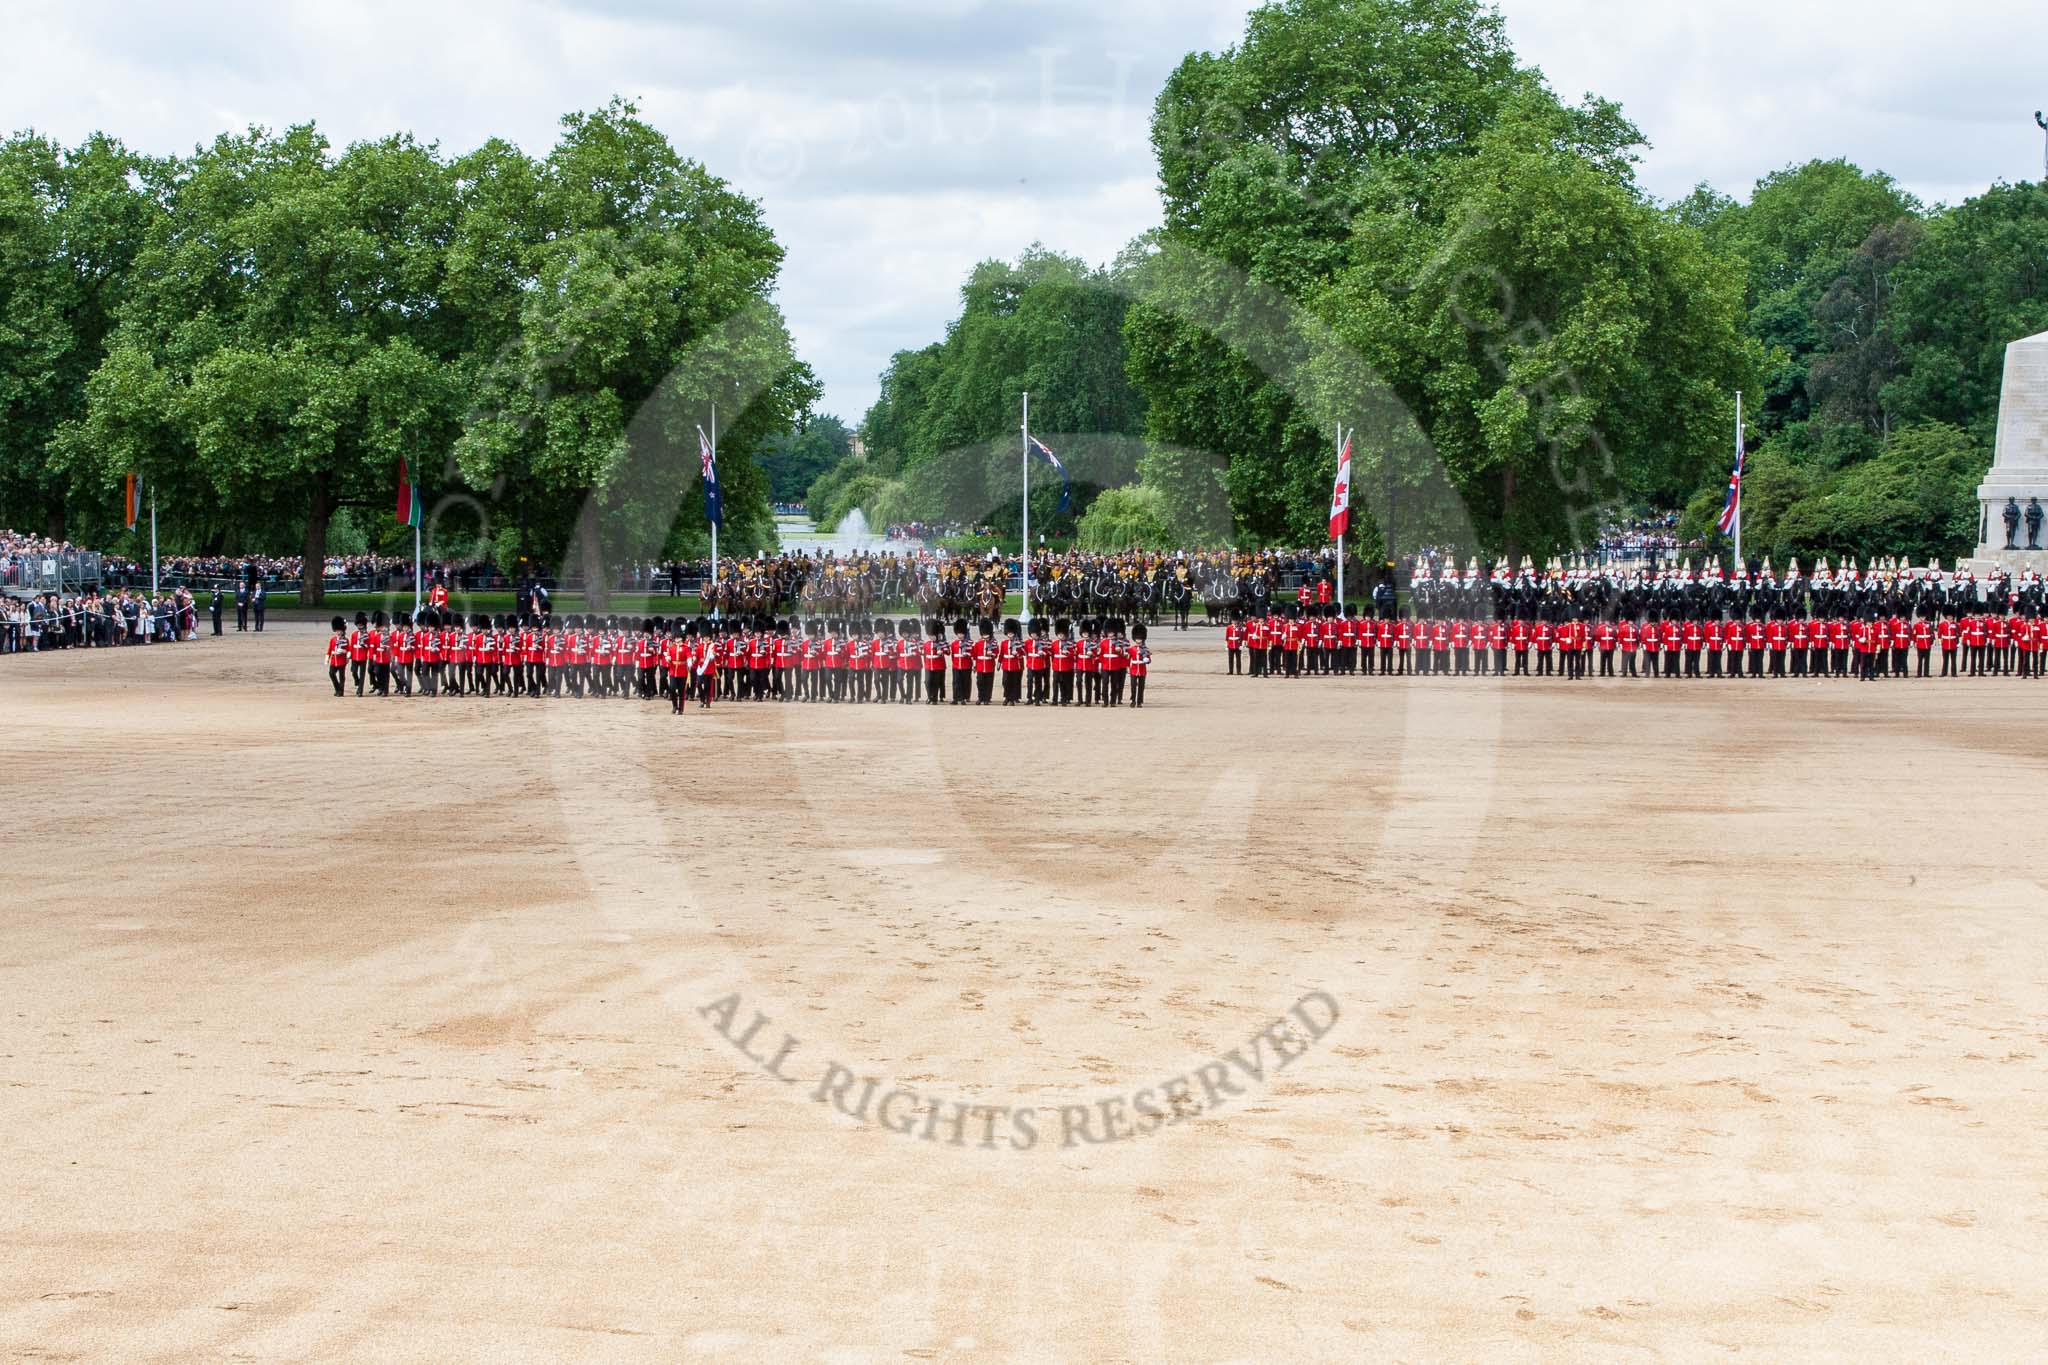 Trooping the Colour 2013: No. 1 Guard (Escort for the Colour),1st Battalion Welsh Guards is moving forward to receive the Colour. Image #435, 15 June 2013 11:17 Horse Guards Parade, London, UK